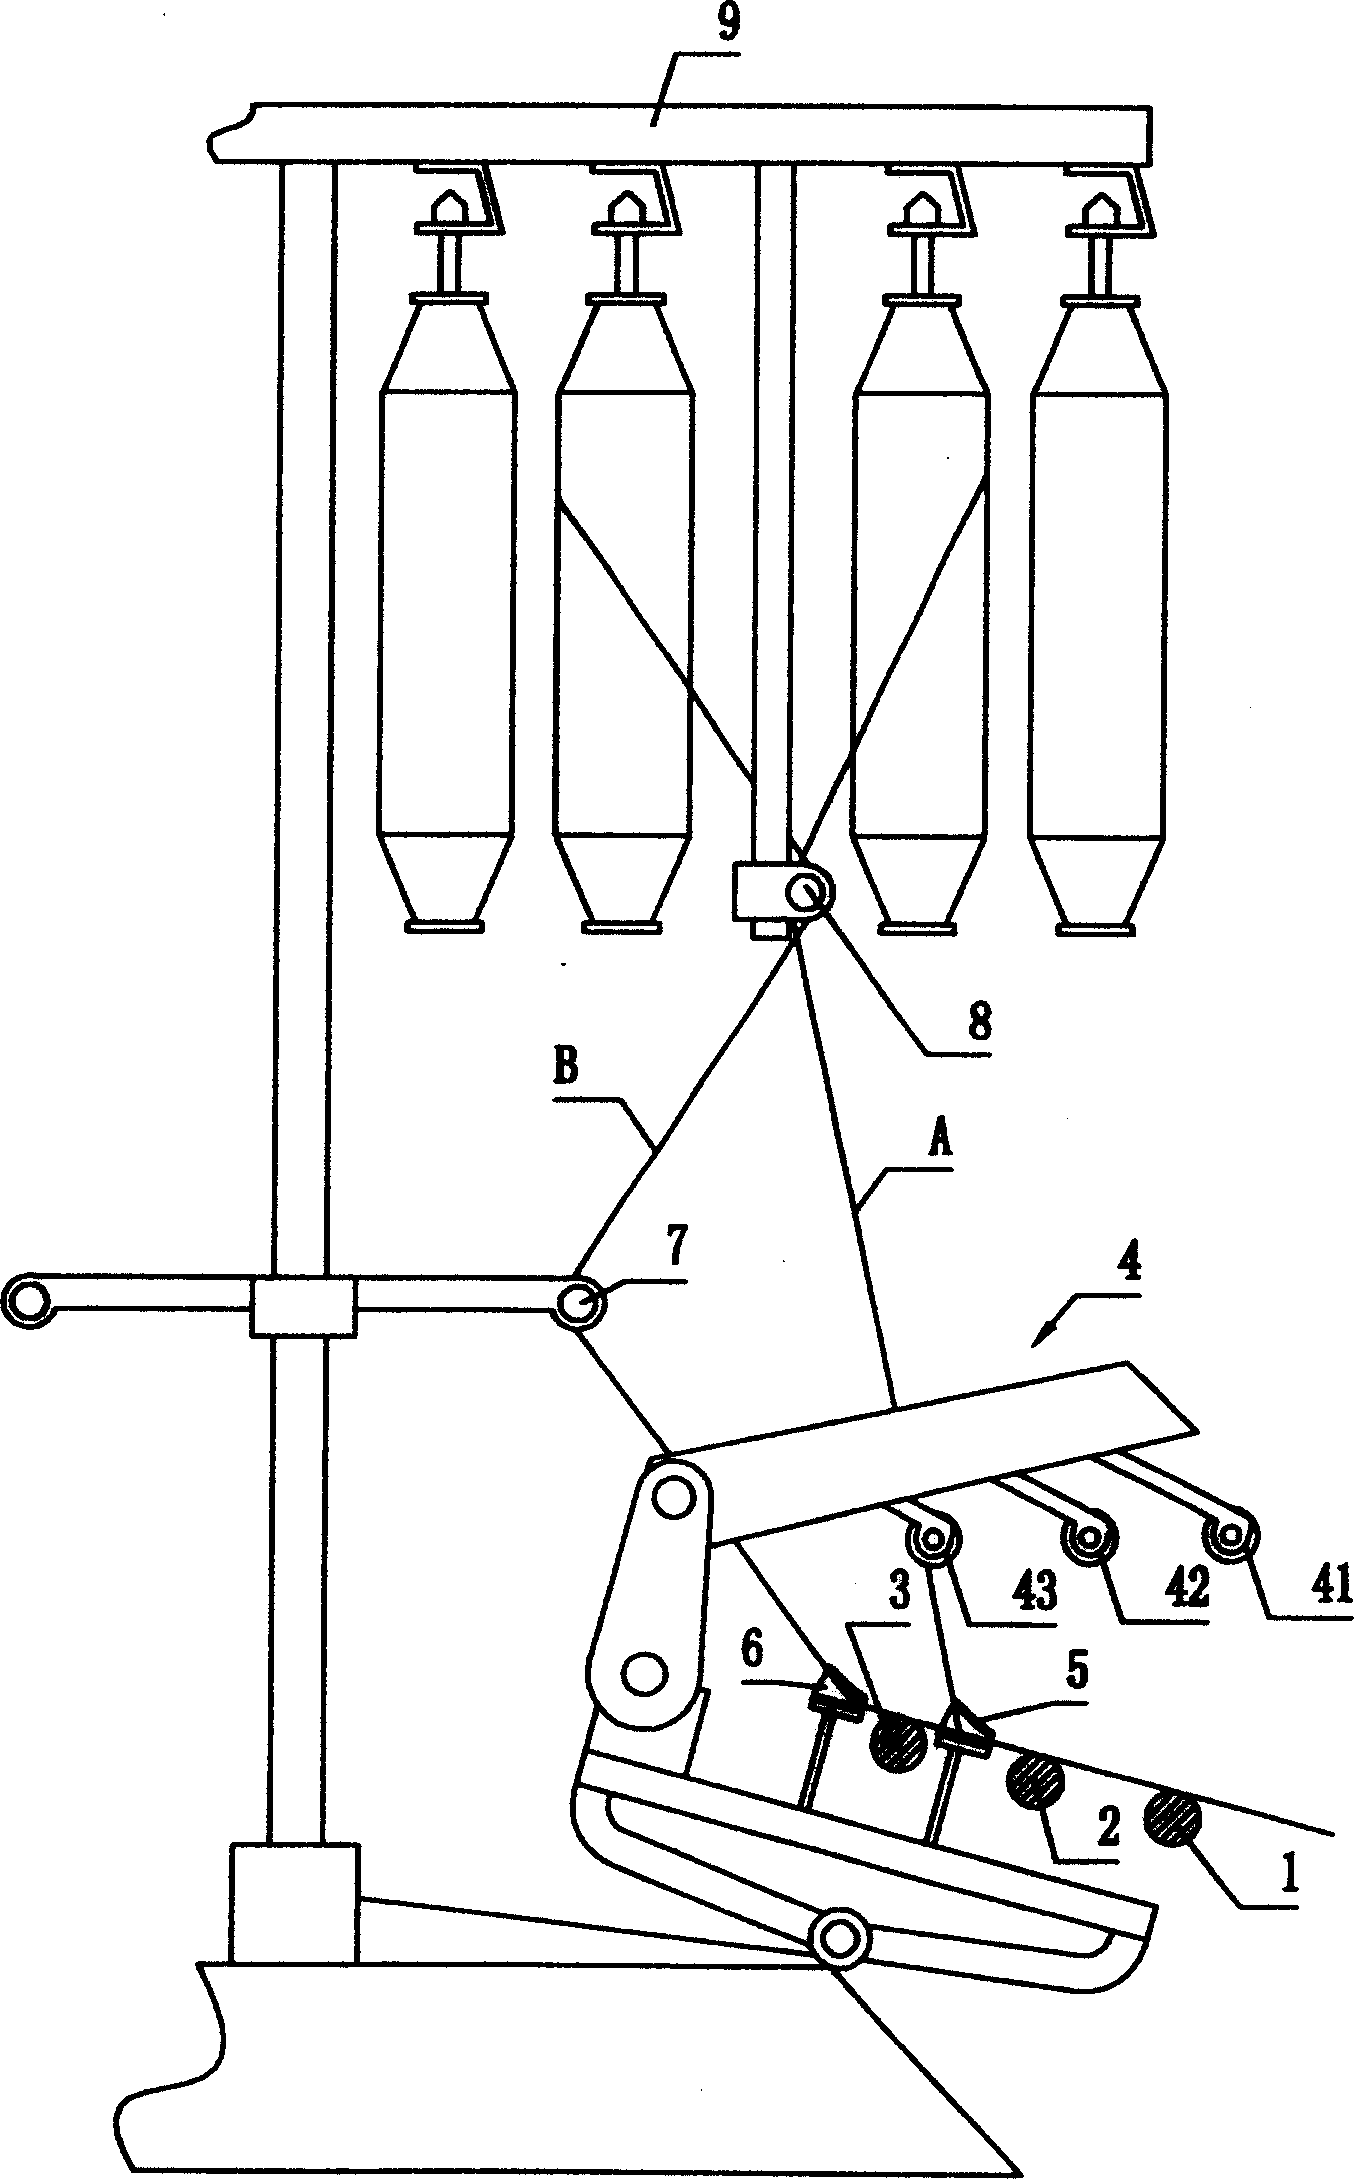 Bunchy yarn, its spinning method and special spinning frame